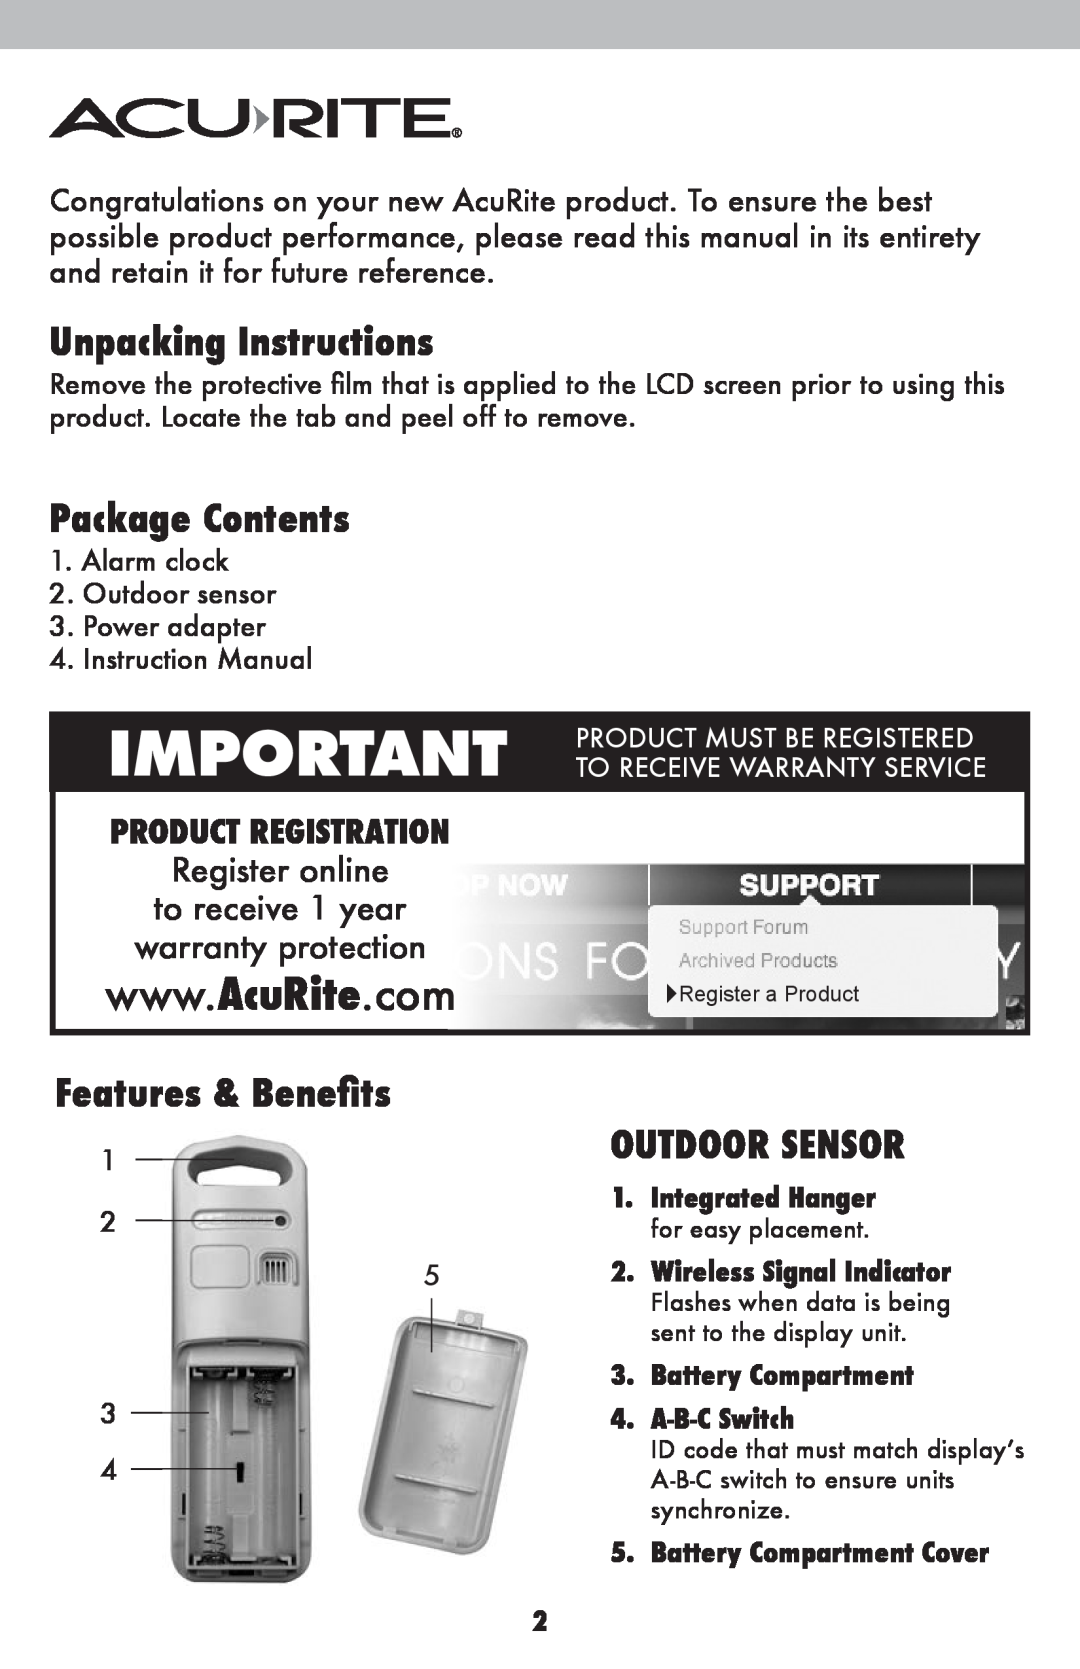 Acu-Rite 13026 Unpacking Instructions, Package Contents, Outdoor Sensor, Features & Benefits, Product Must Be Registered 